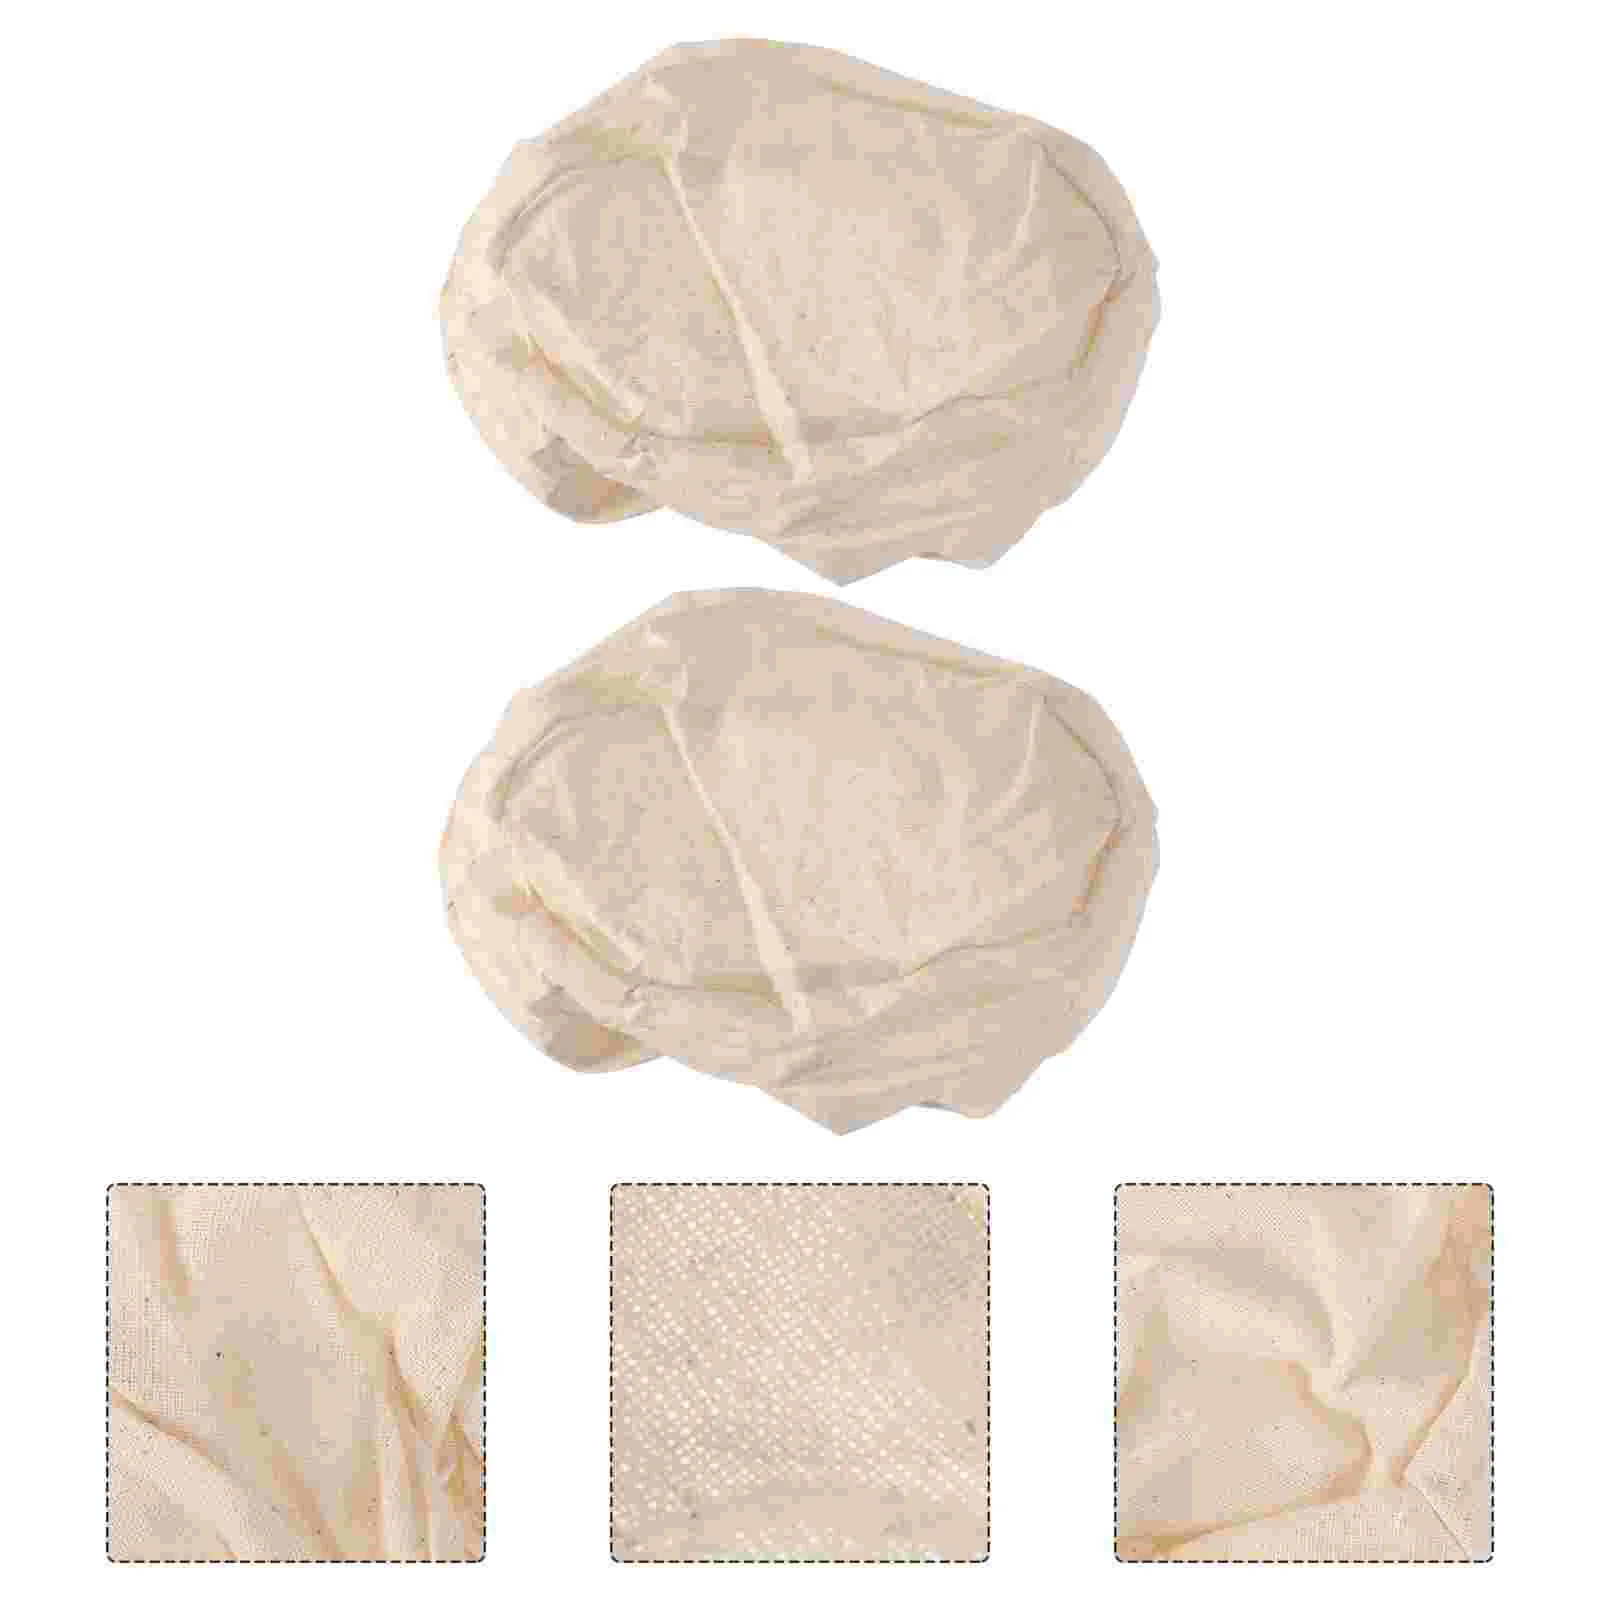 

2 PCS Ricotta Cheese Cheesecloth Strainer Food Grade Cheesecloth Organic Cheesecloth Bulk Cheesecloth Bread Baking Liner